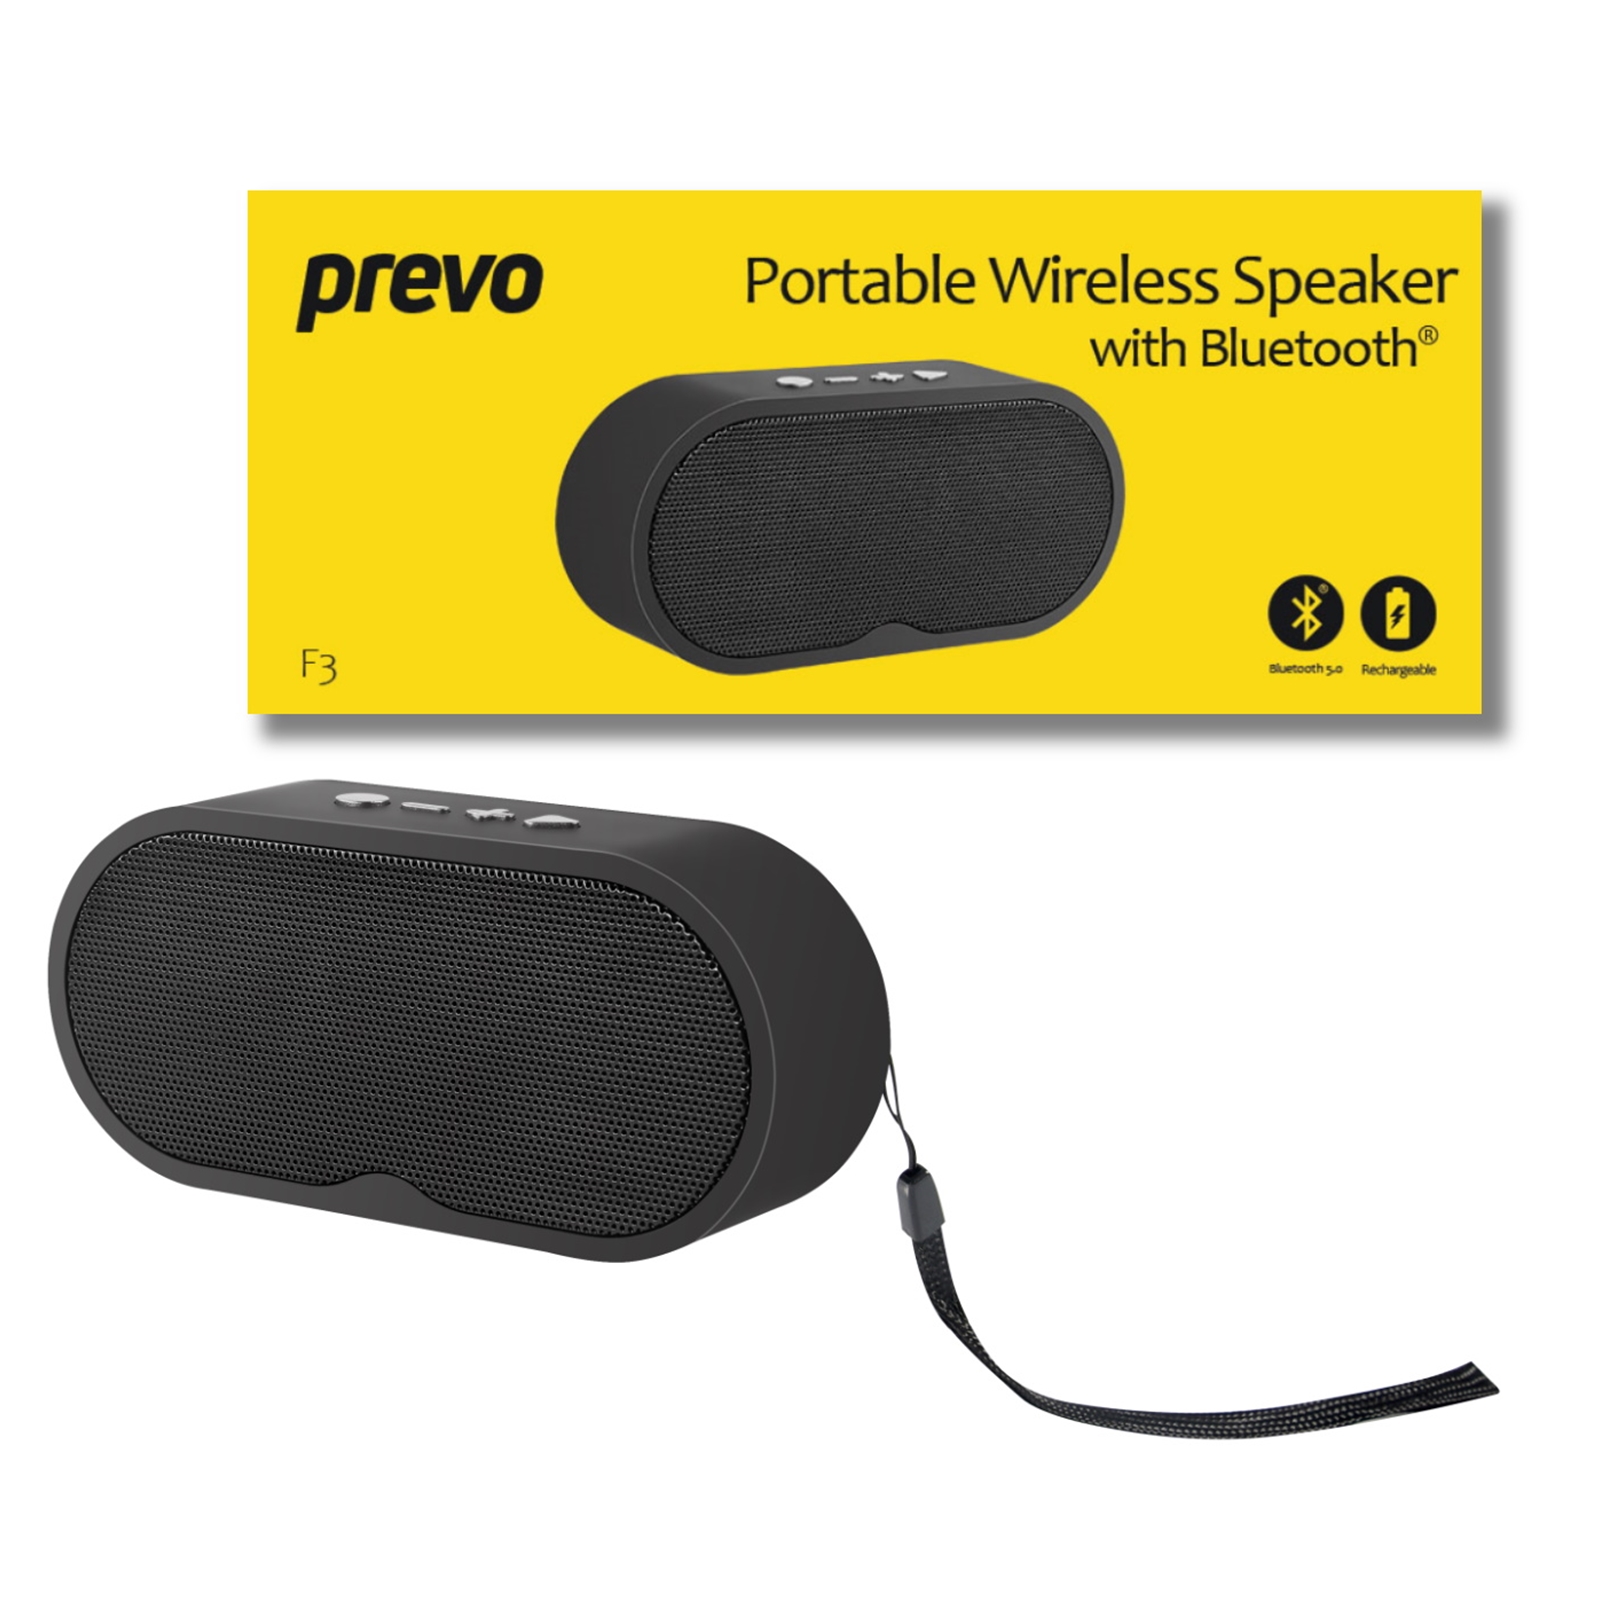 Prevo F3 Portable Wireless TWS Rechargeable Speaker with Bluetooth, SD card compatibility up to 32GB, FM Radio, Hands-Free Calling, 5W, Black